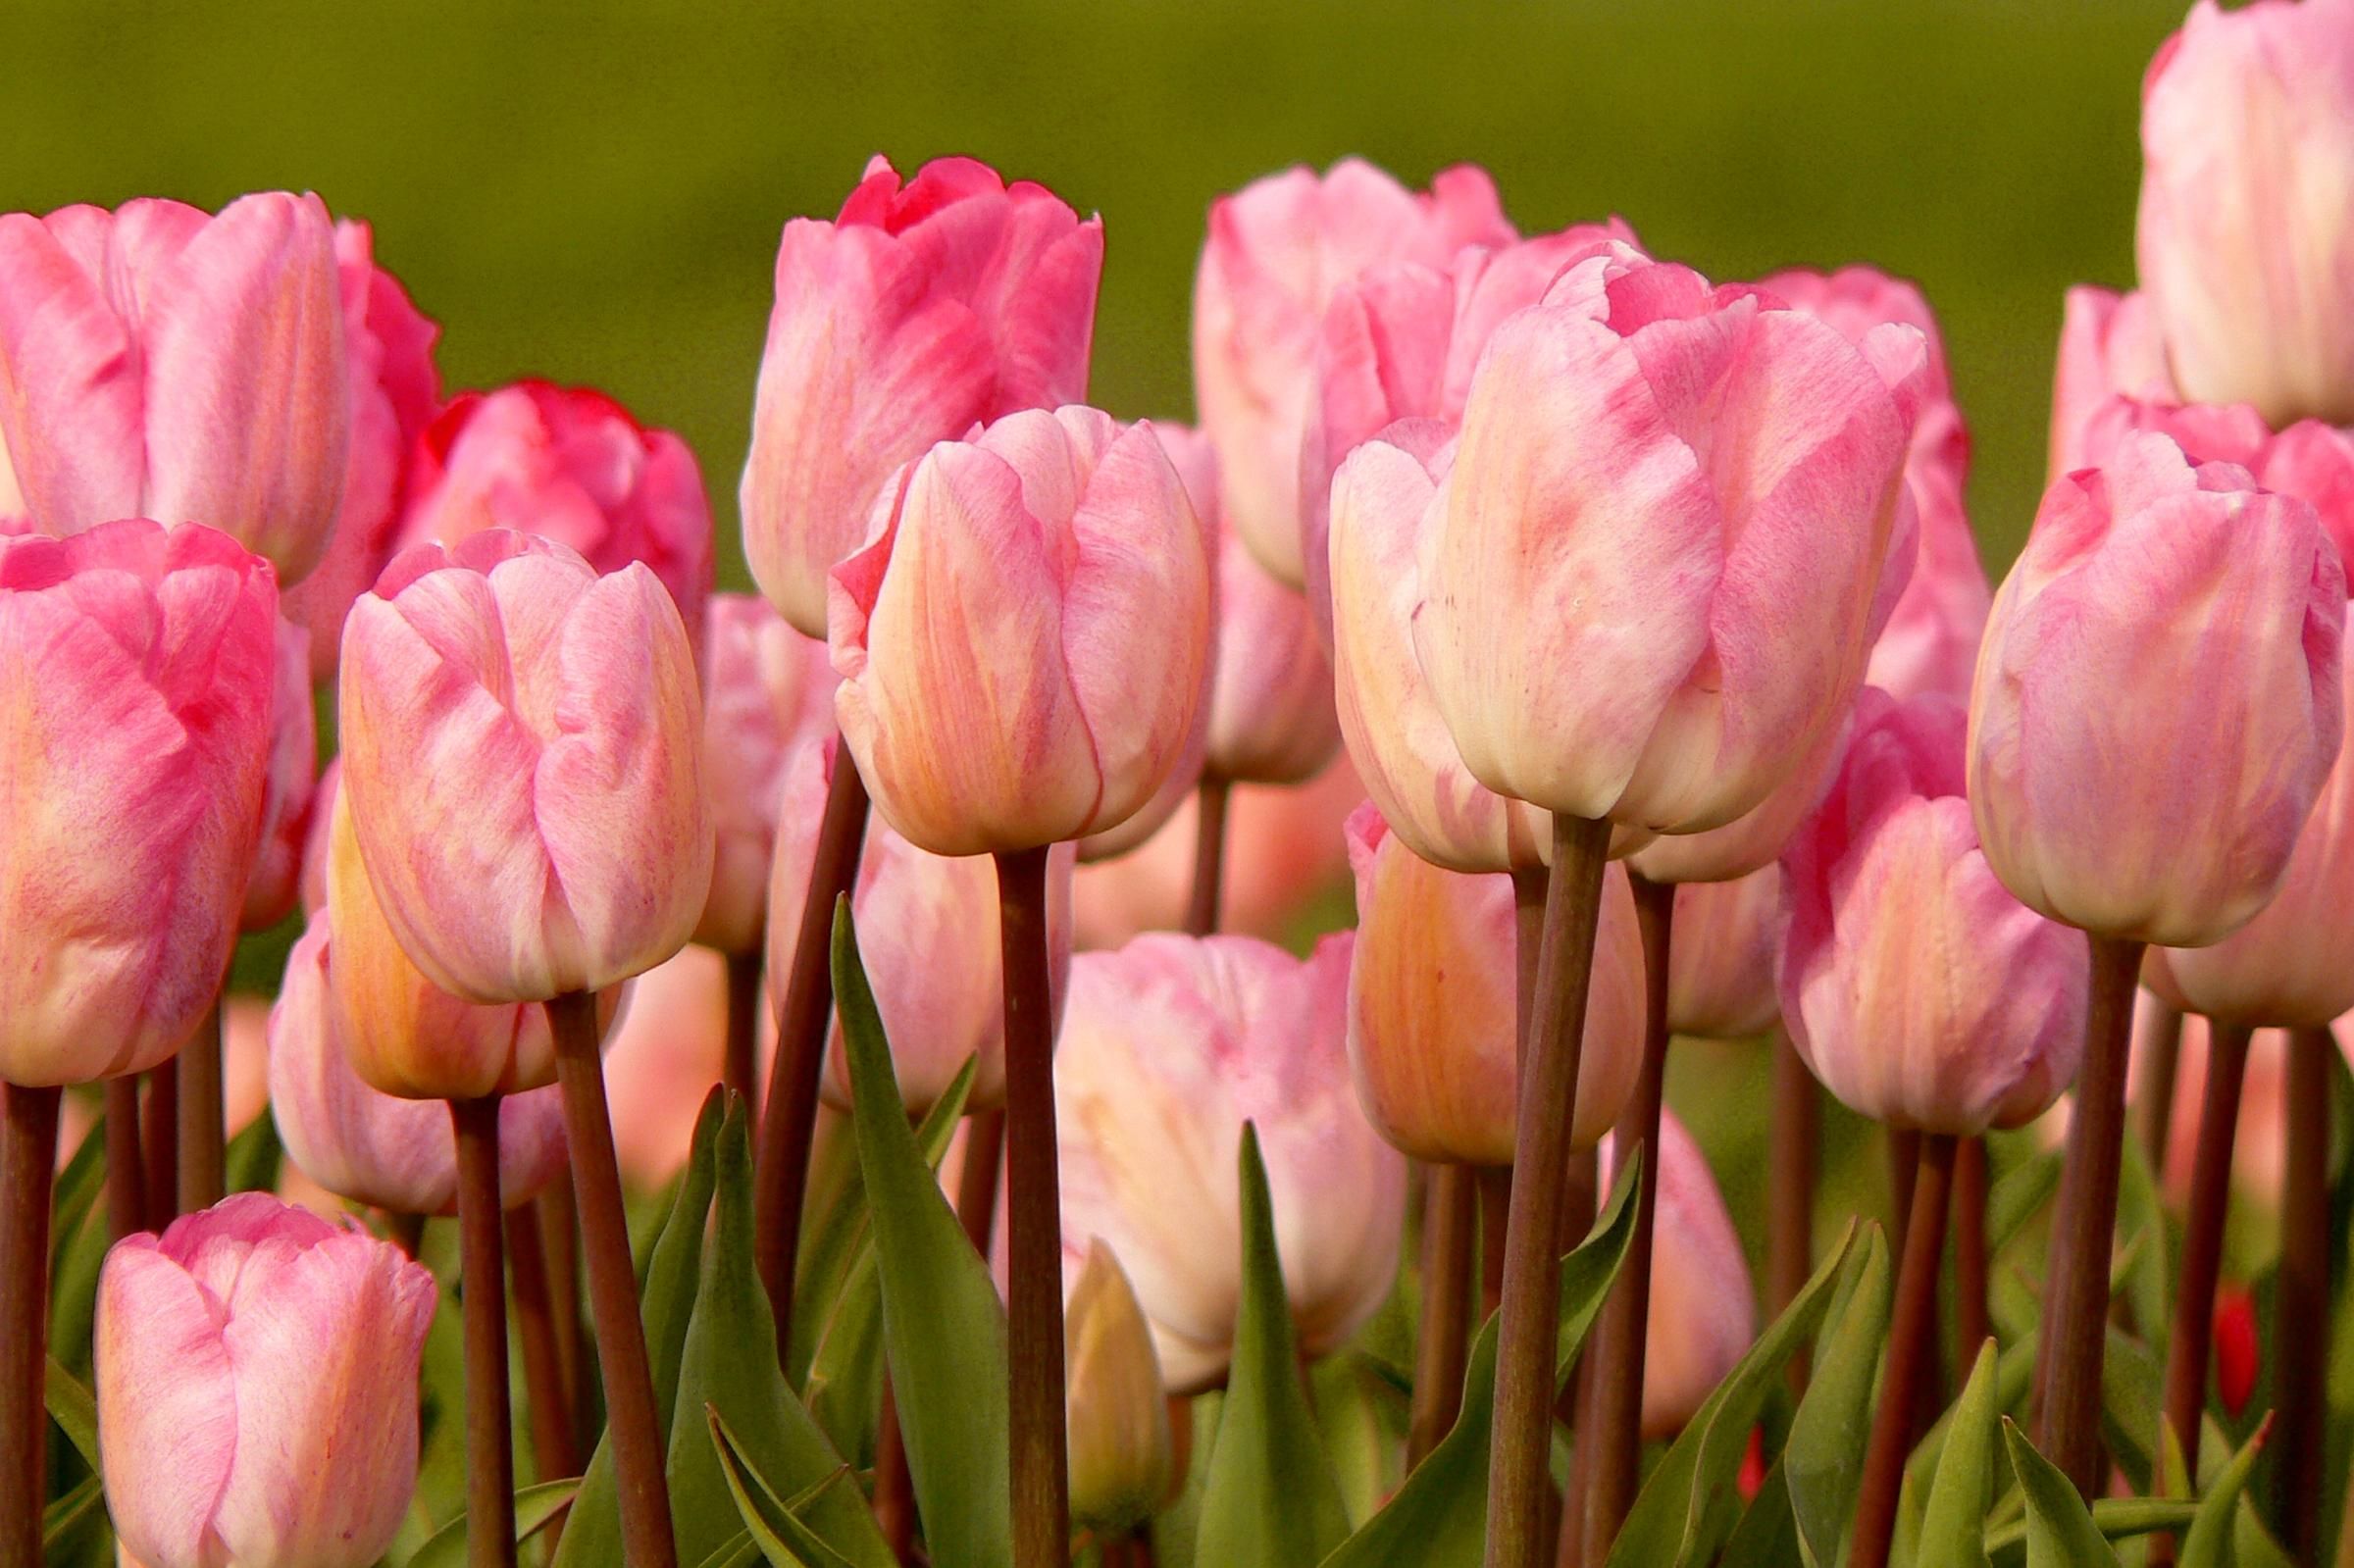 720p wallpapers for android,flower,flowering plant,petal,tulip,pink